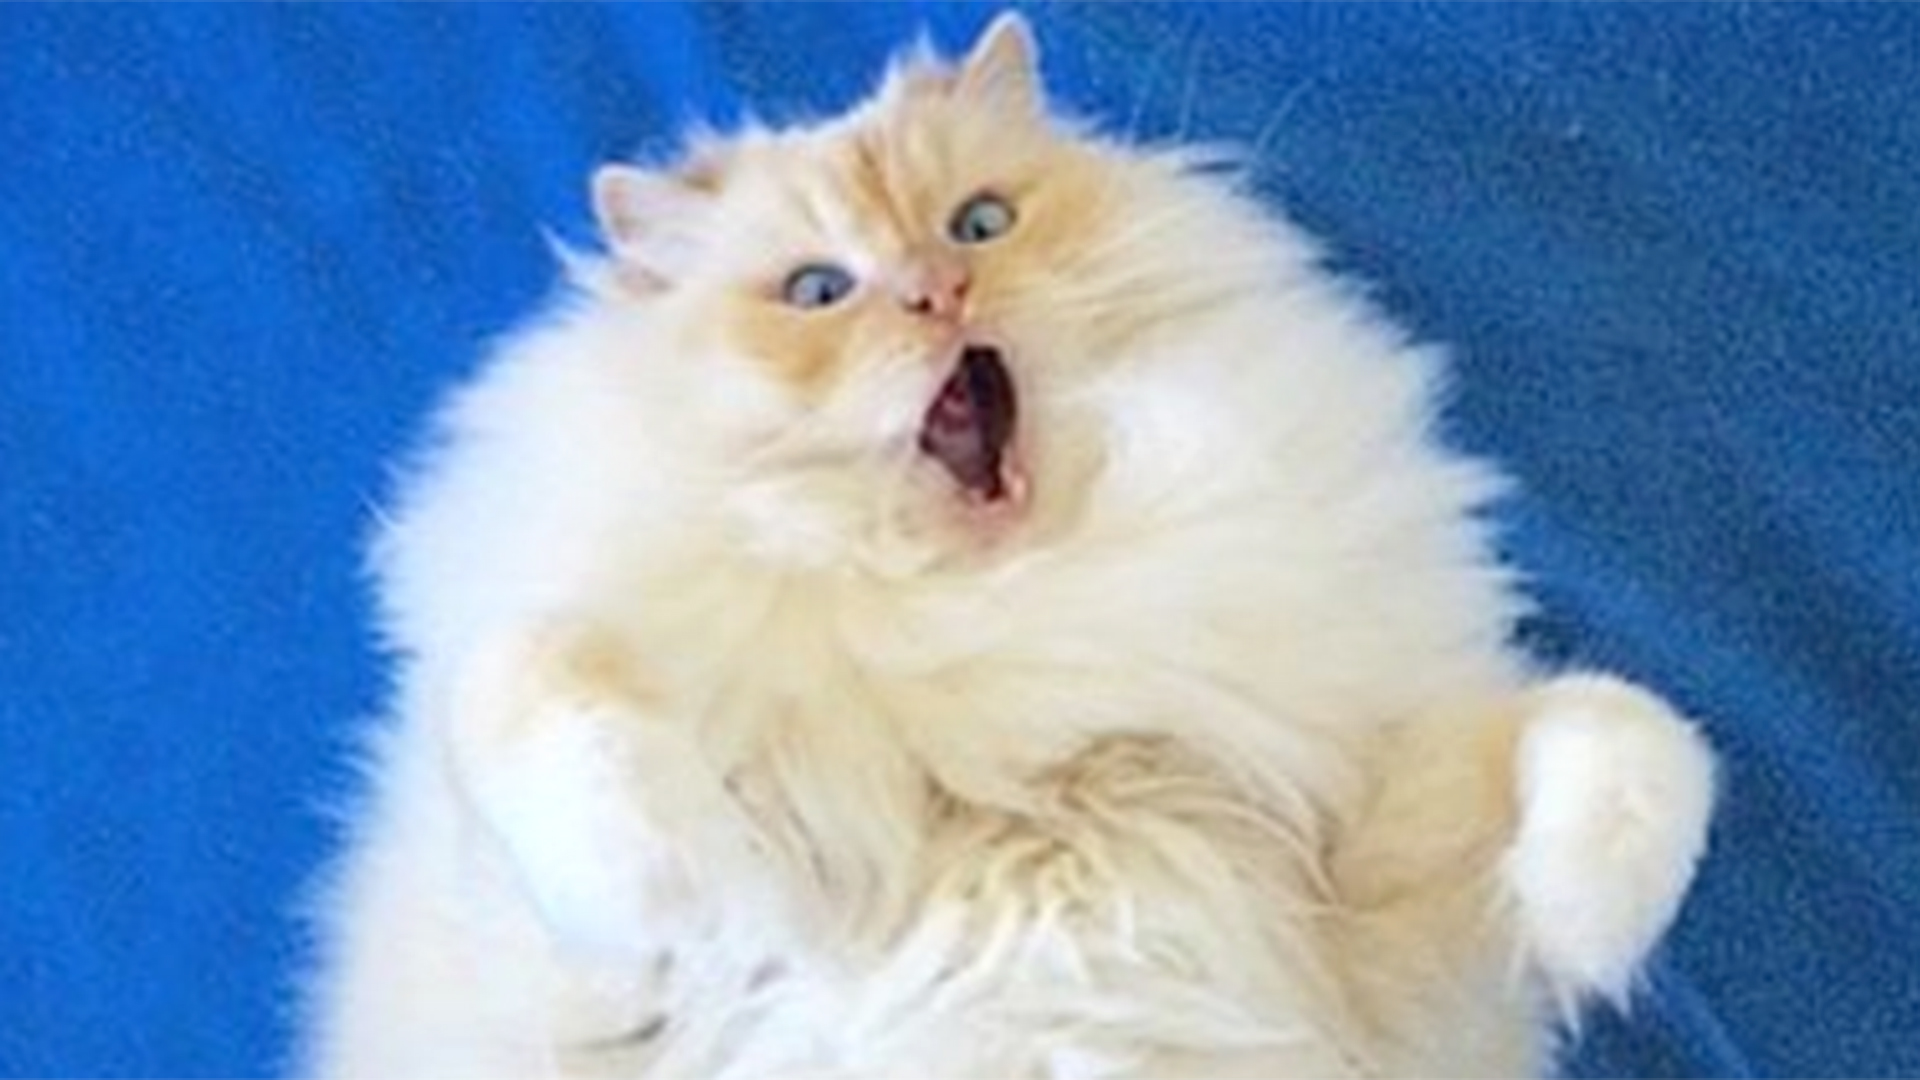 This cat named Sky the ragdoll is almost too fluffy to be real